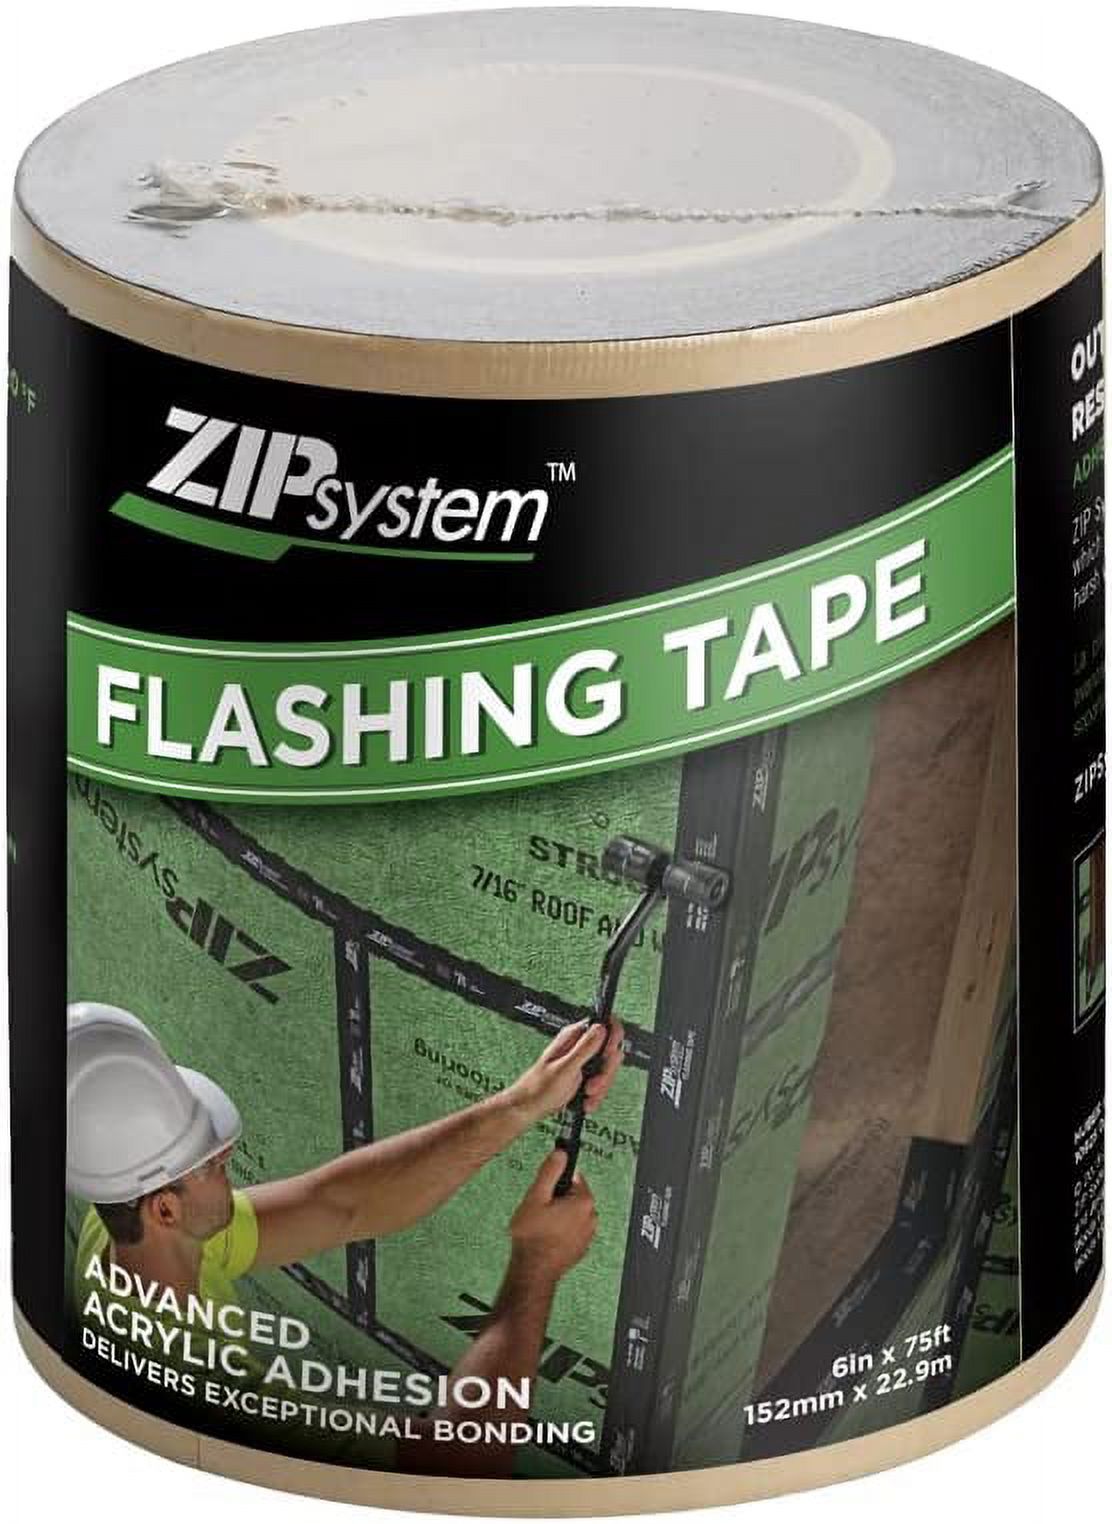 ZIP System Flashing Tape , 6 inches x 75 feet , Self-Adhesive Flashing for  Doors-Windows Rough Openings 